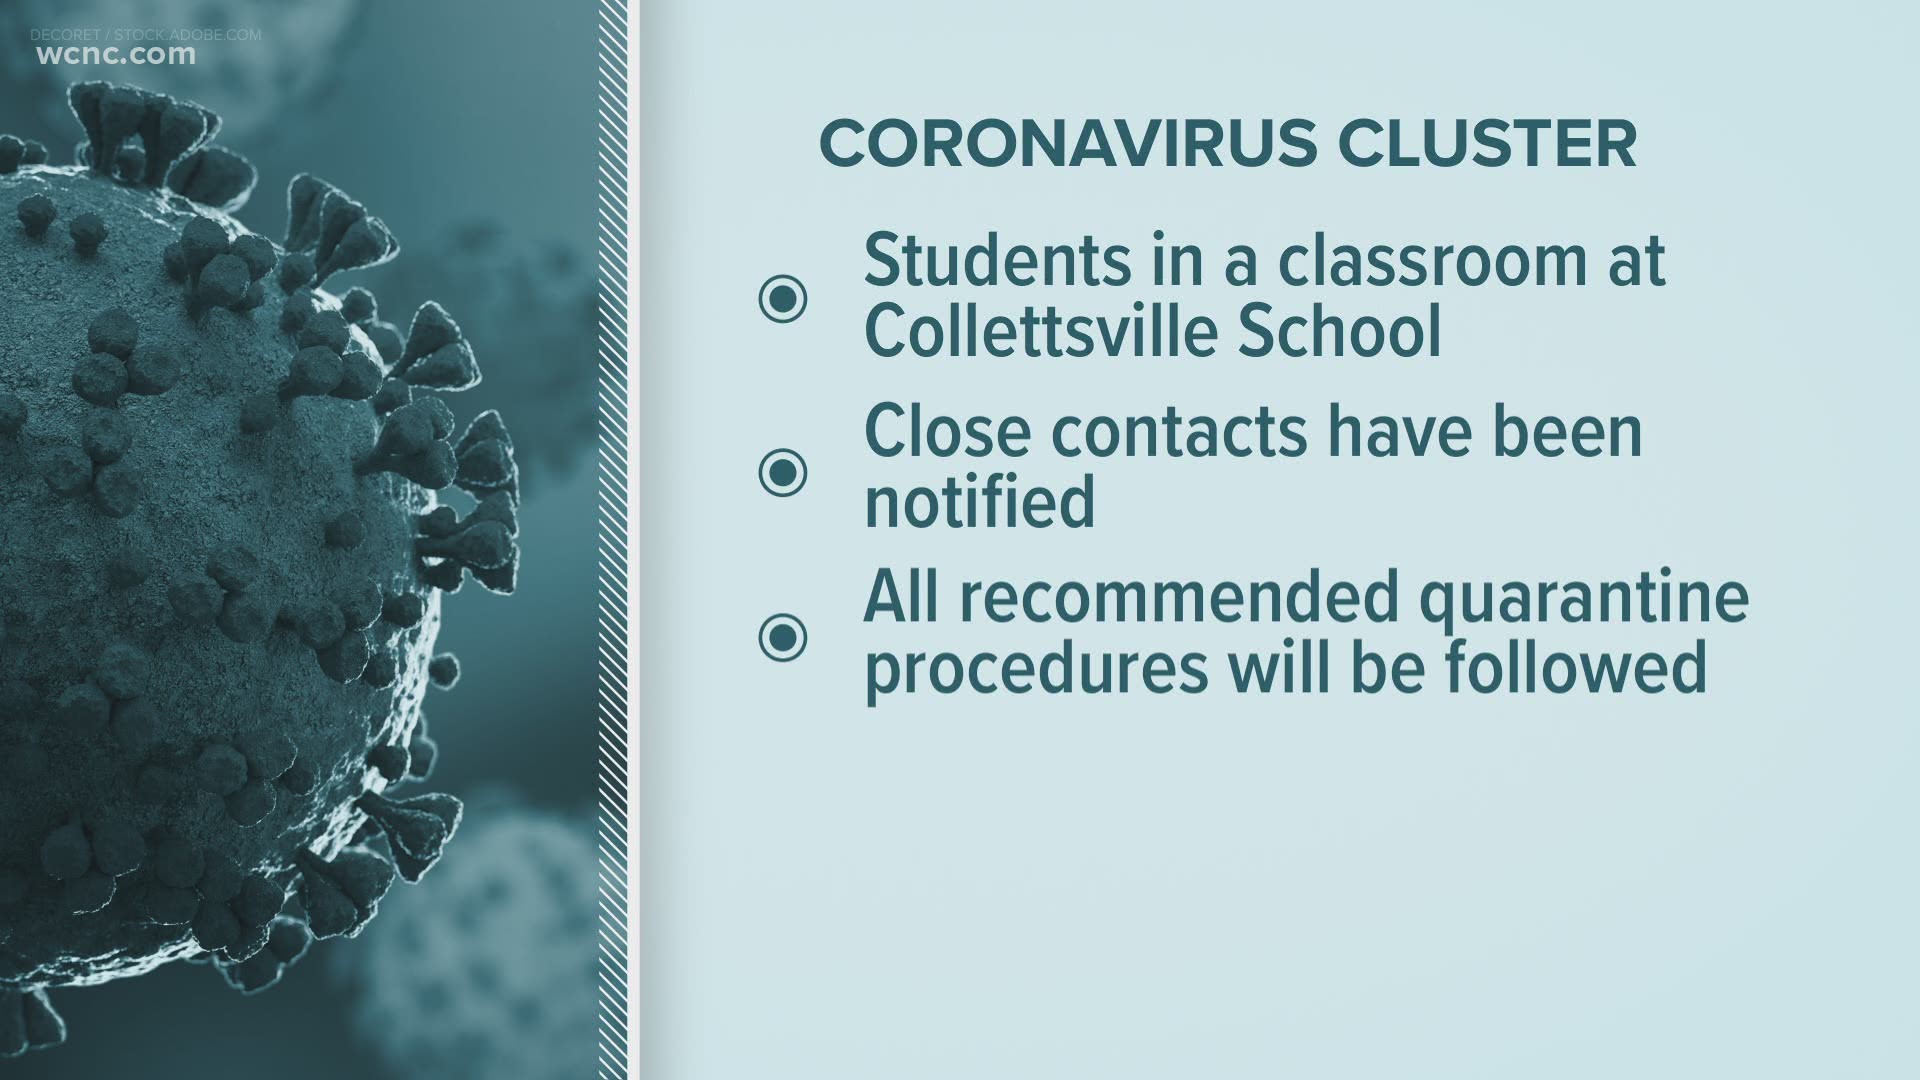 The cluster involves students at Collettsville School.